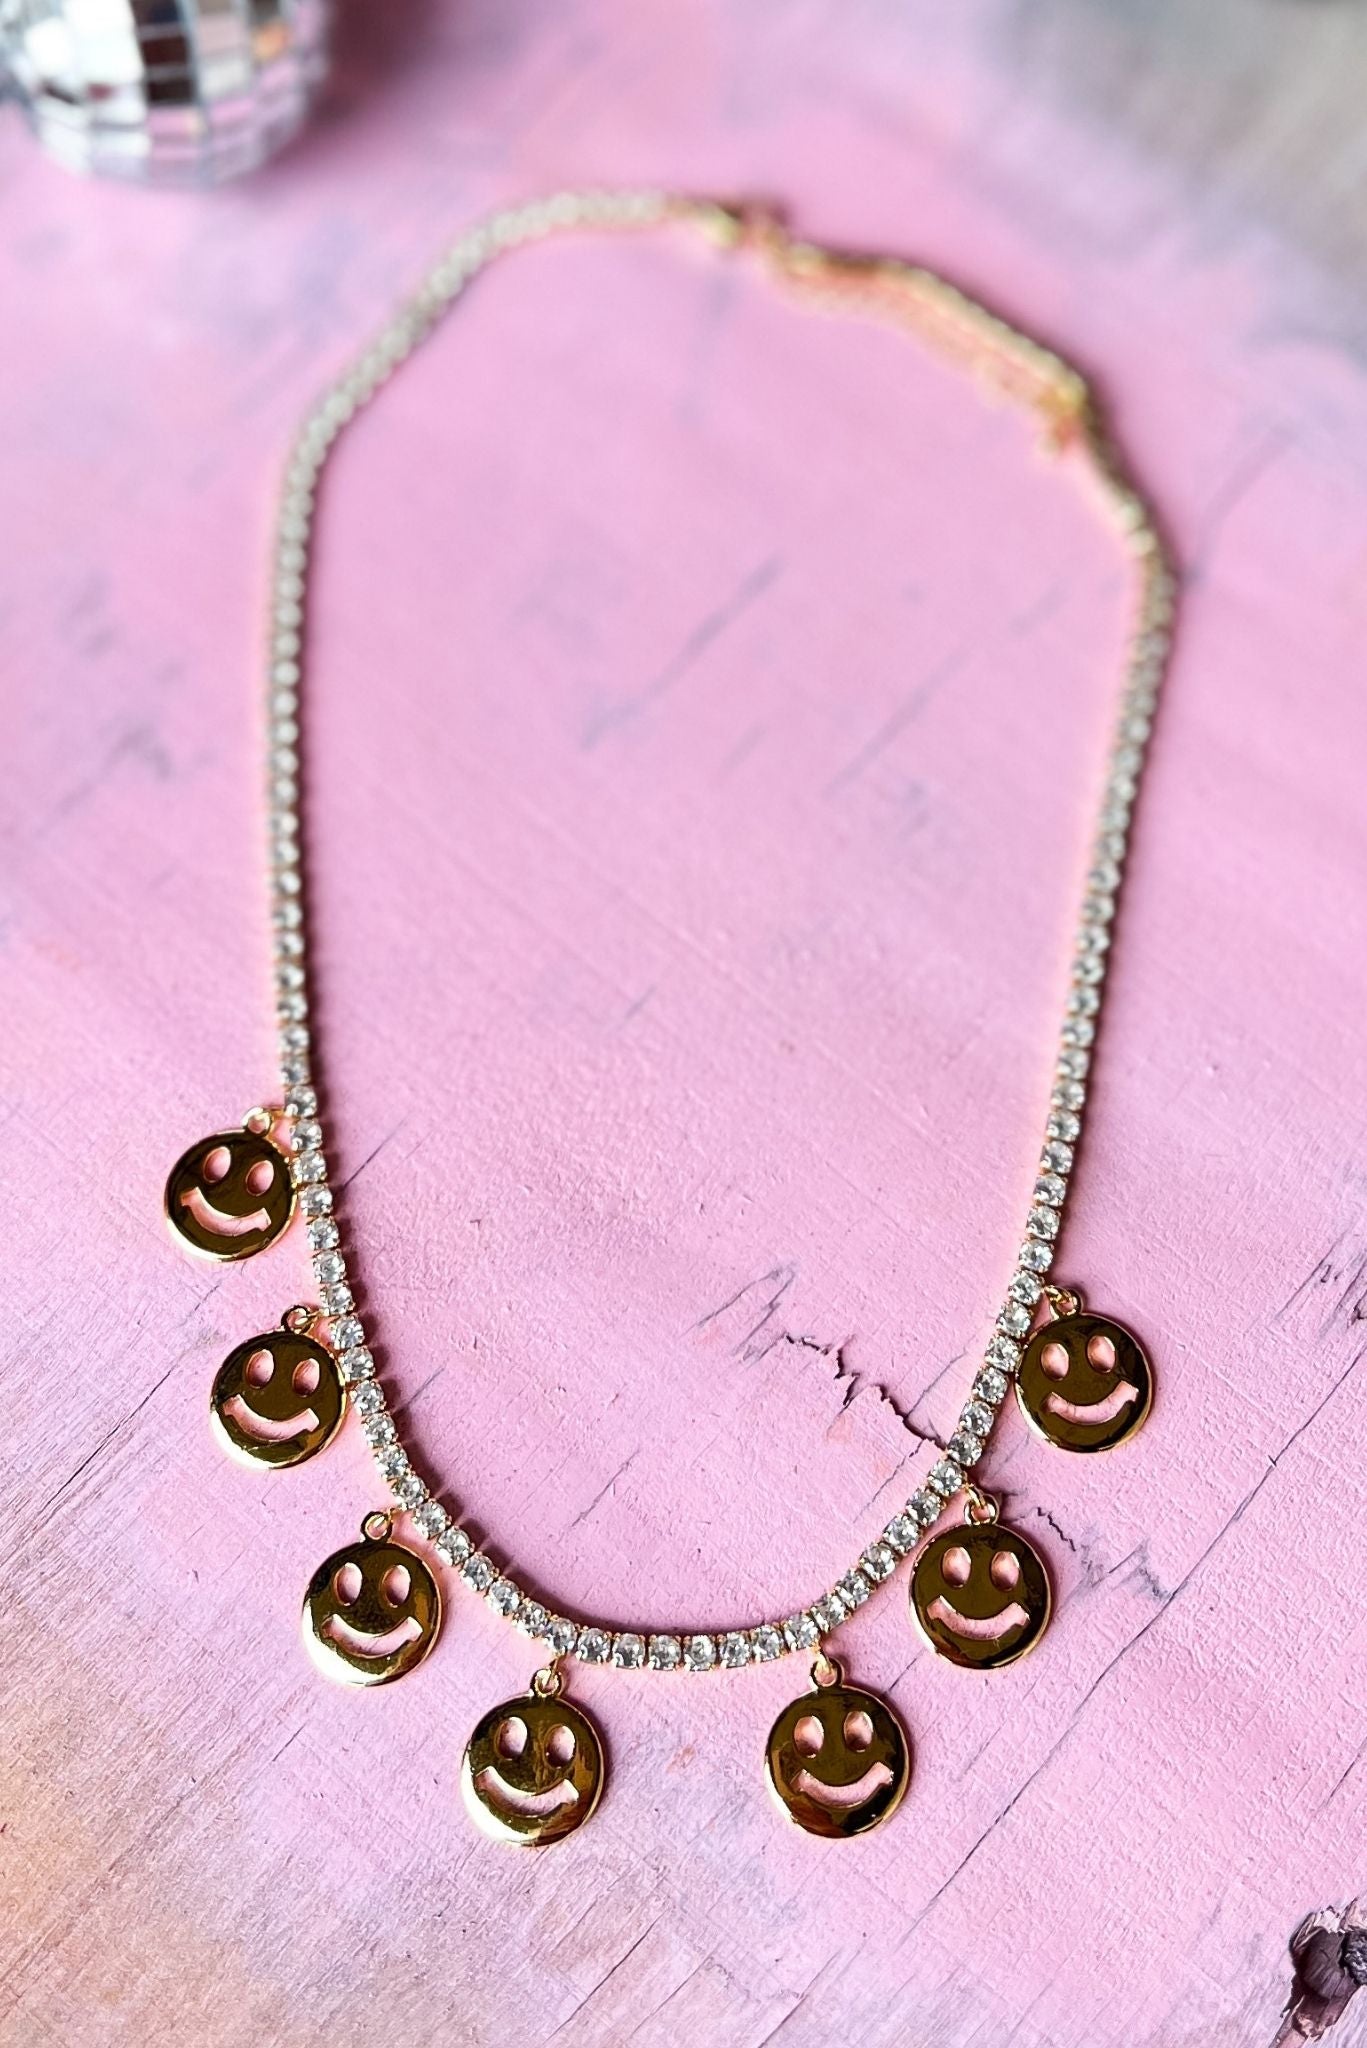 SSYS Gold Smiley Face Charm Tennis Necklace